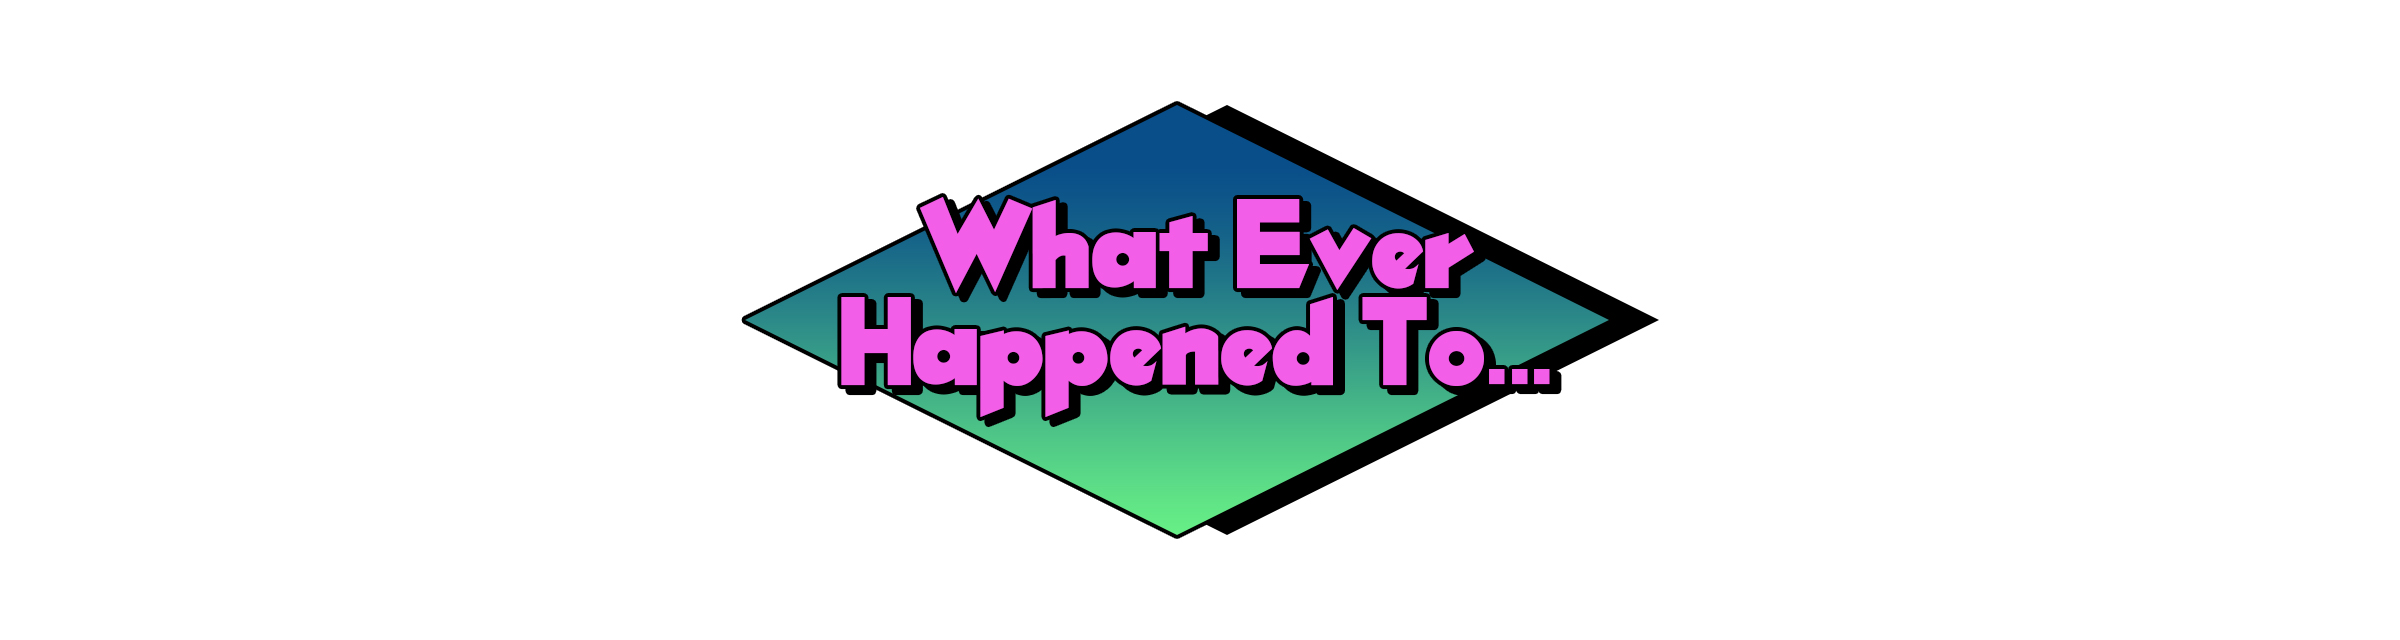 1570034165606-whatever-happened-to